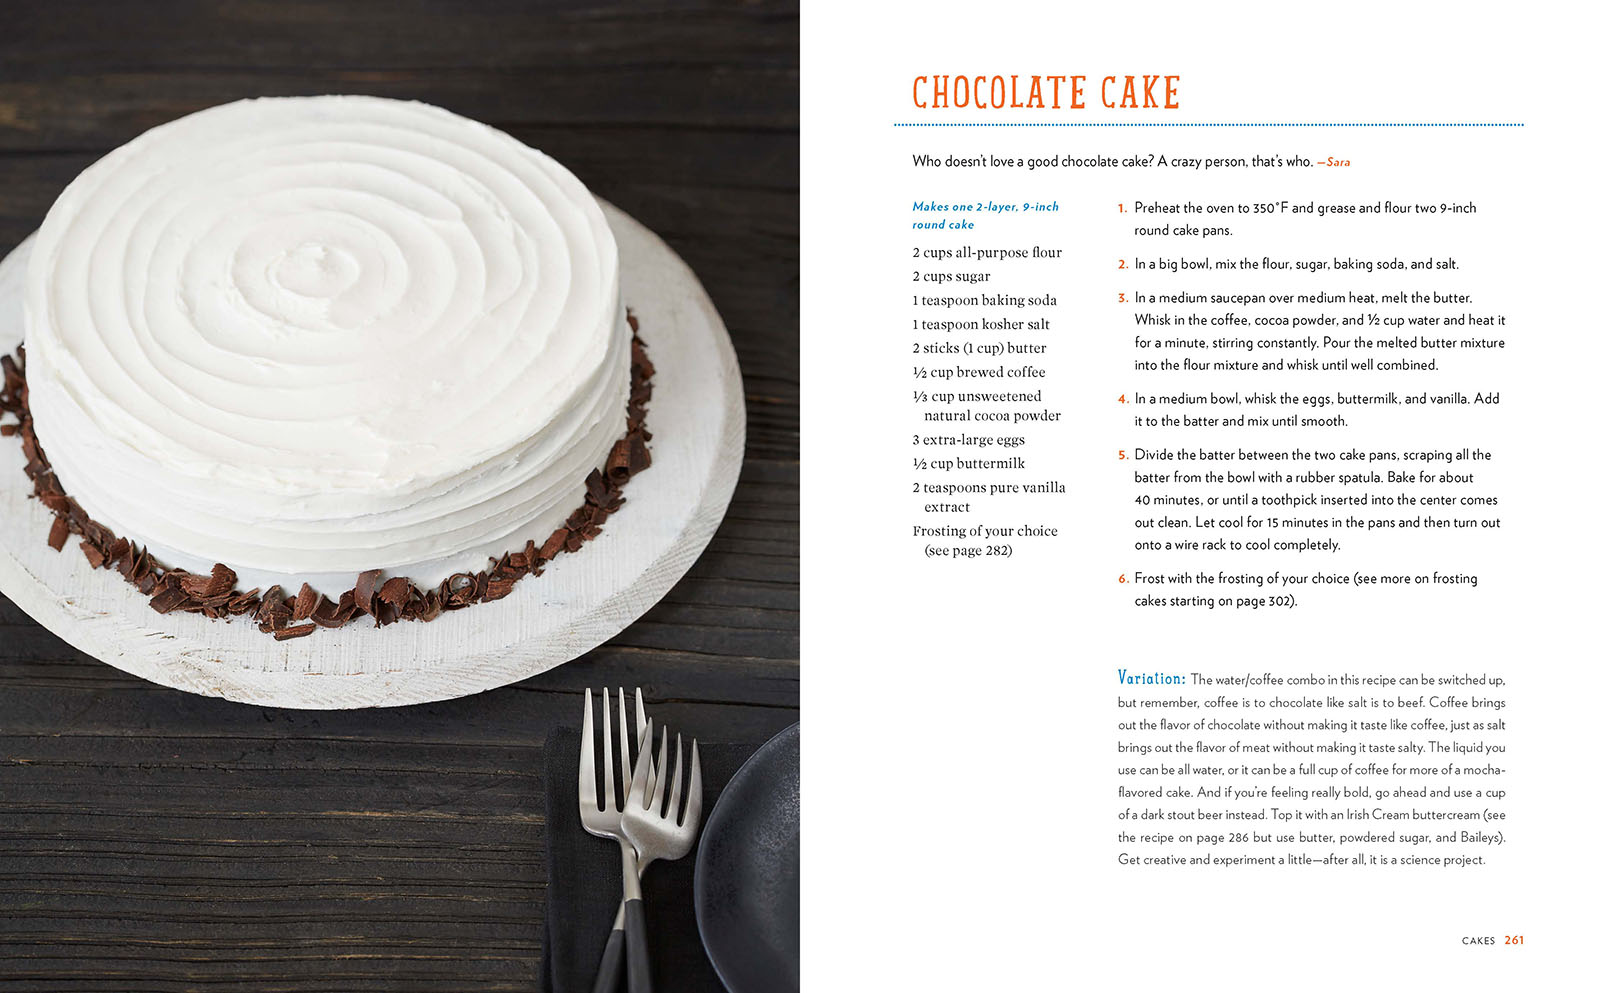 Introducing Duff Bakes, a New Cookbook from Duff Goldman 